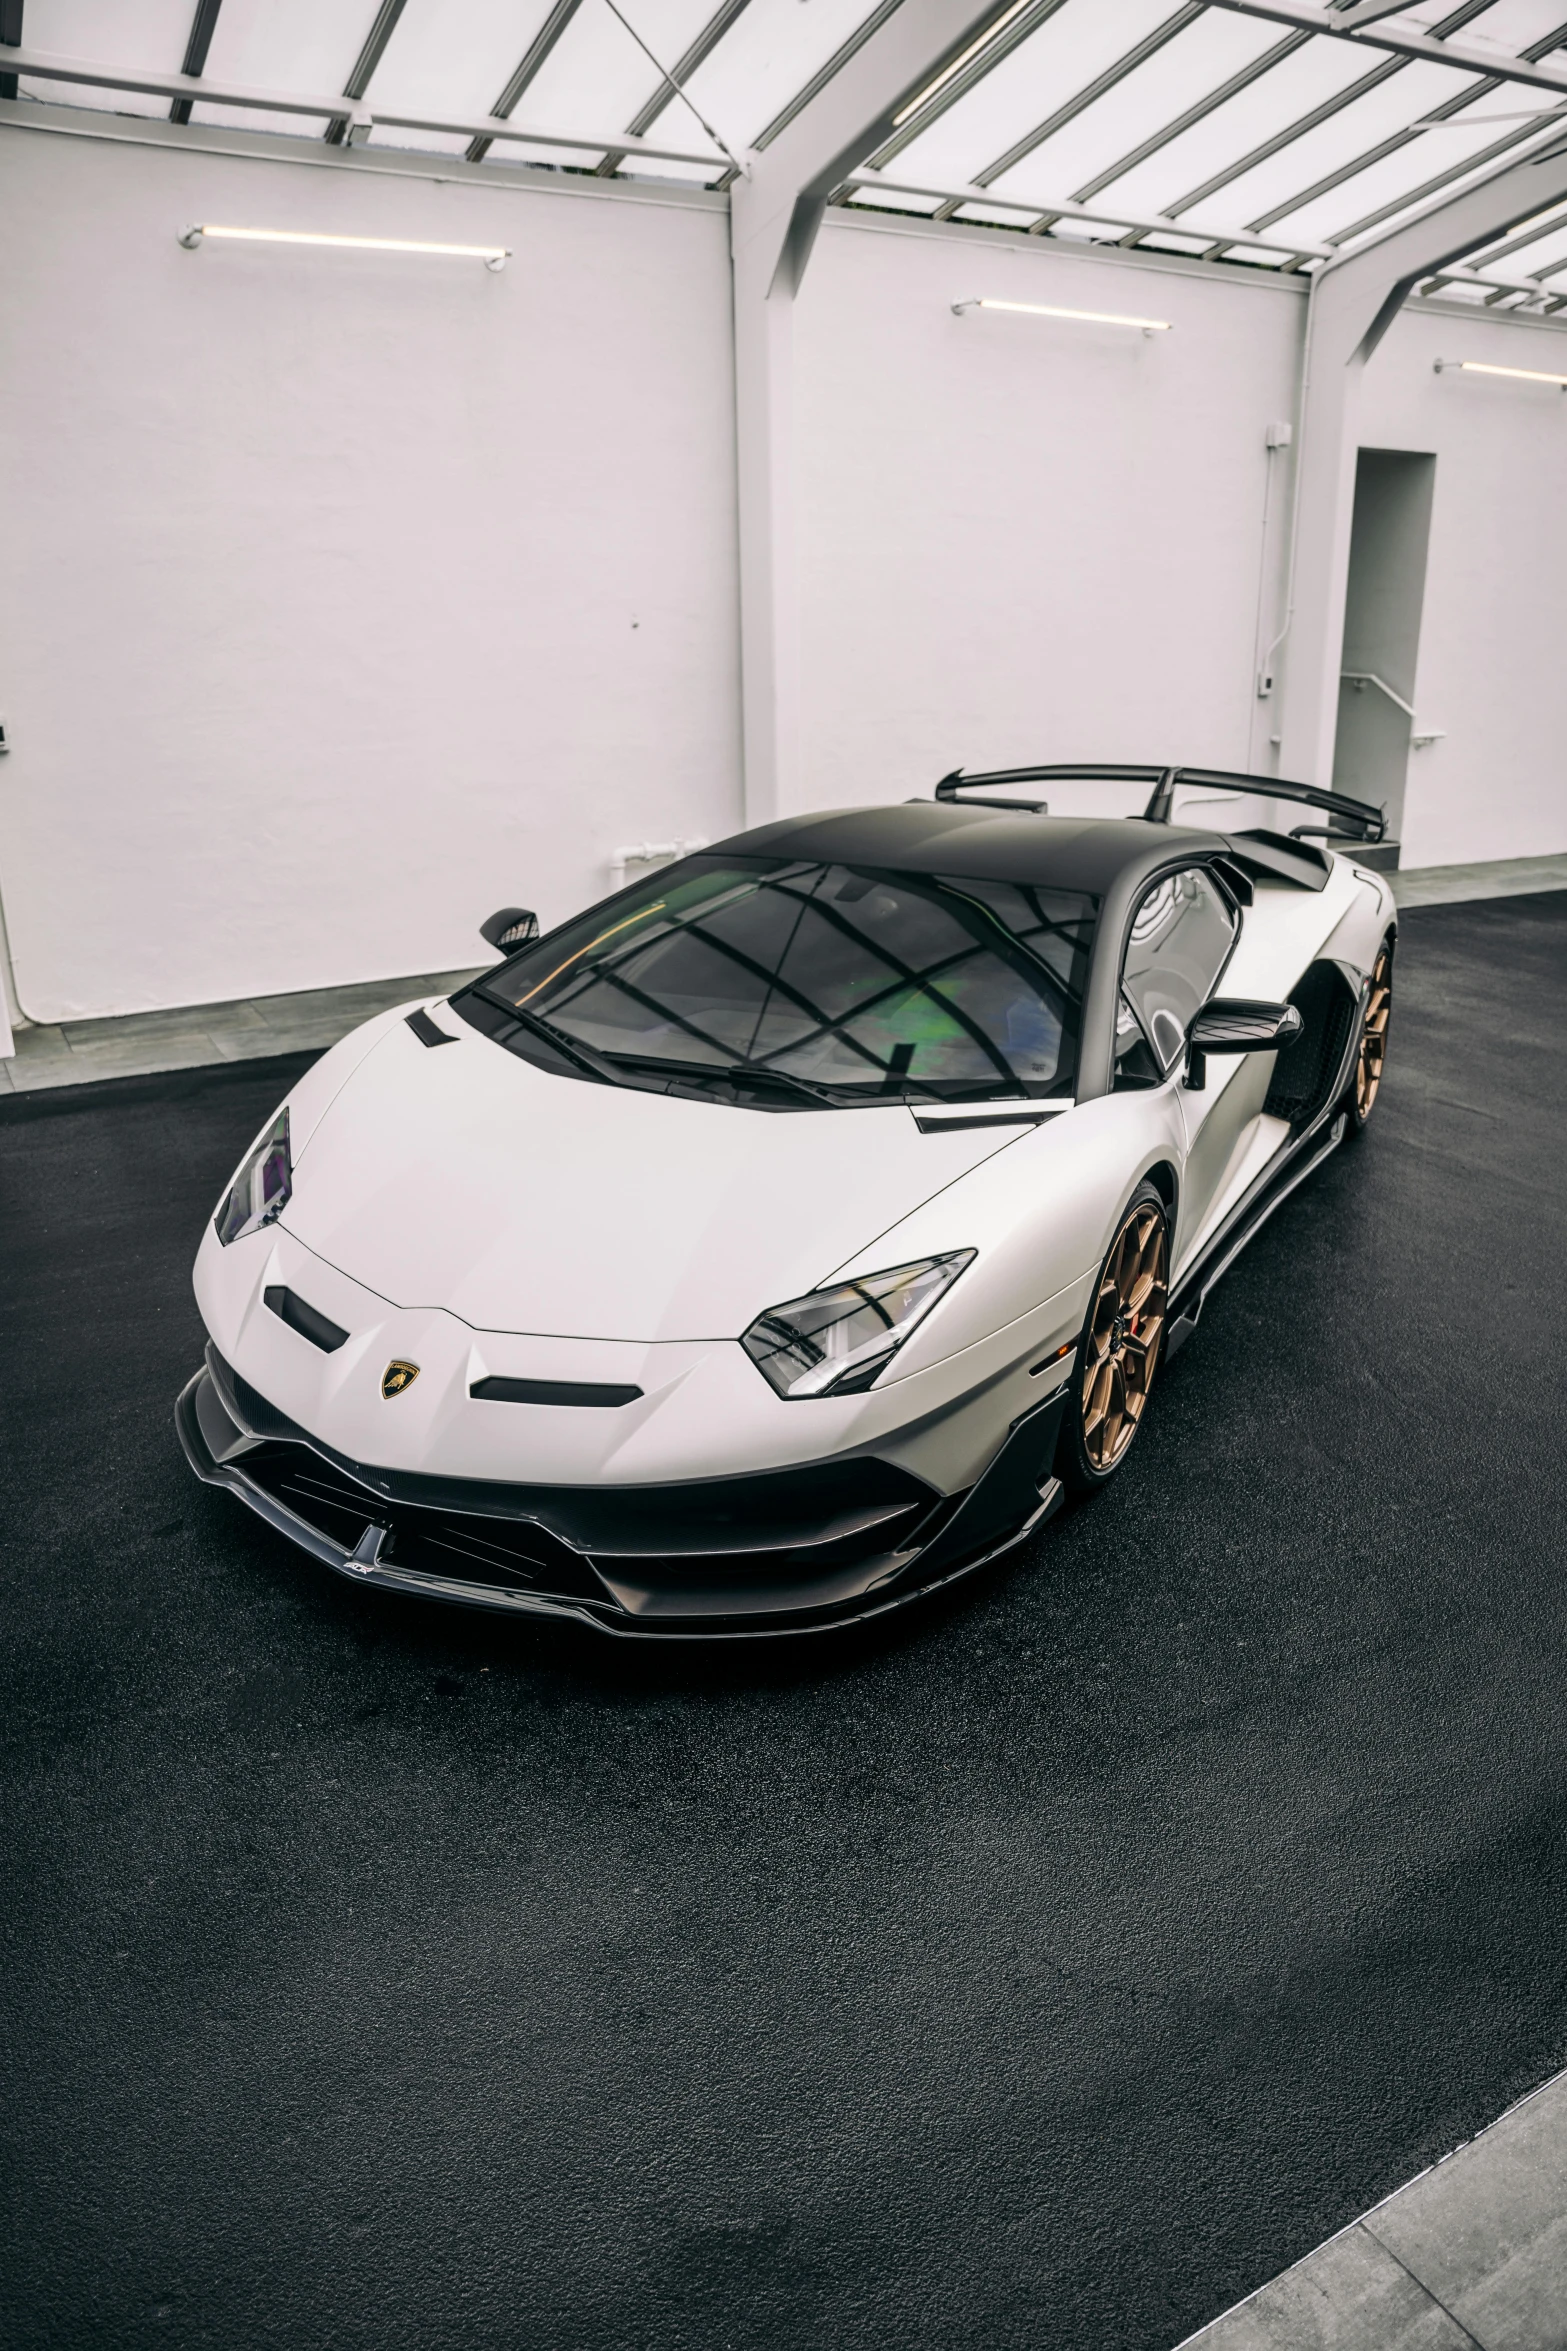 a very nice looking white sports car in a building